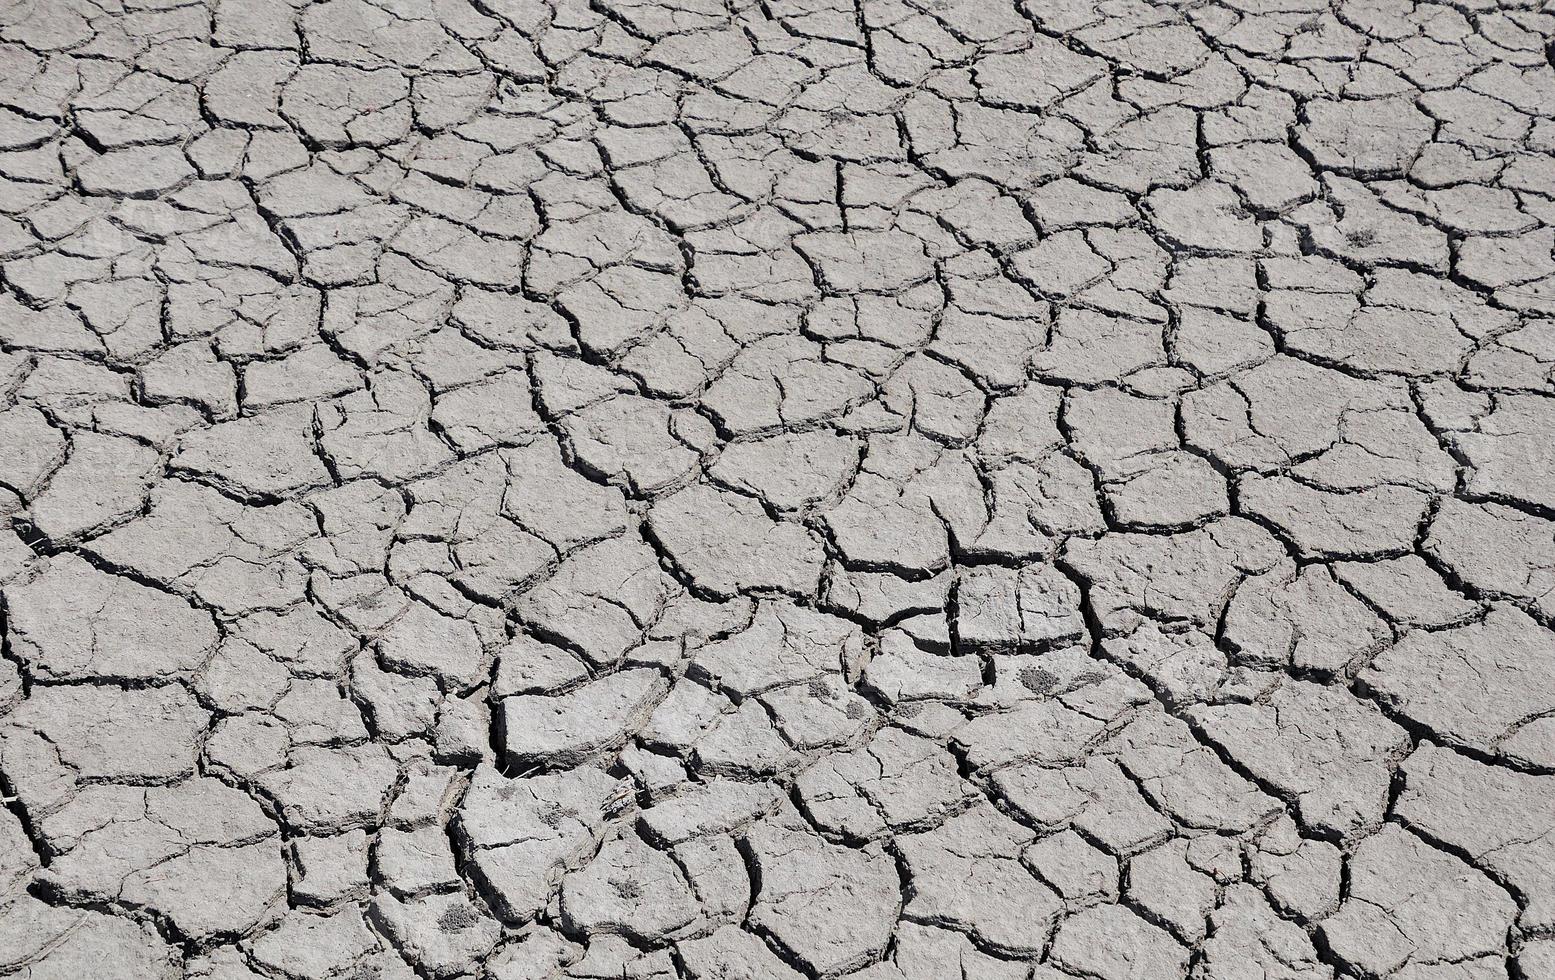 cracked by drought the ground photo